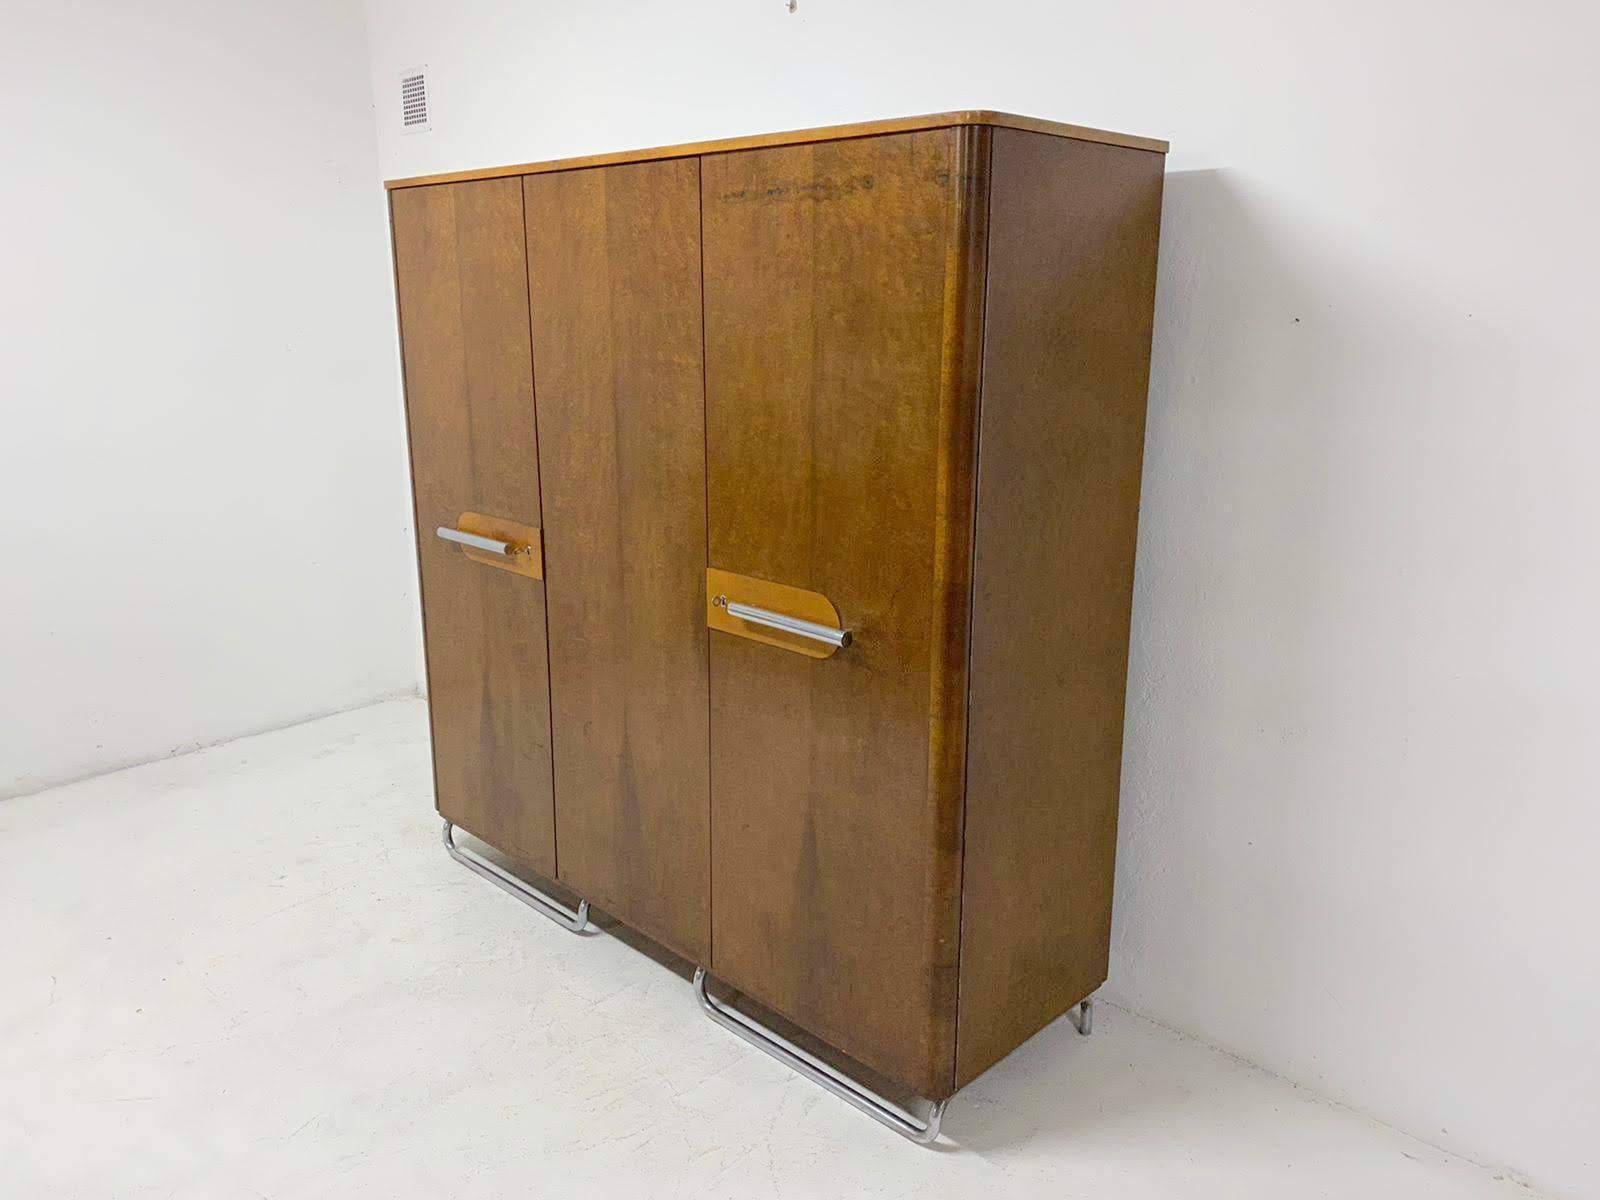 Functionalist wardrobe with chrome elements from the Bauhaus period. It was made in the former Czechoslovakia by Mücke & Melder company in the 1930s.
This is a typical example of residential furniture from the Bauhaus period in Central Europe.